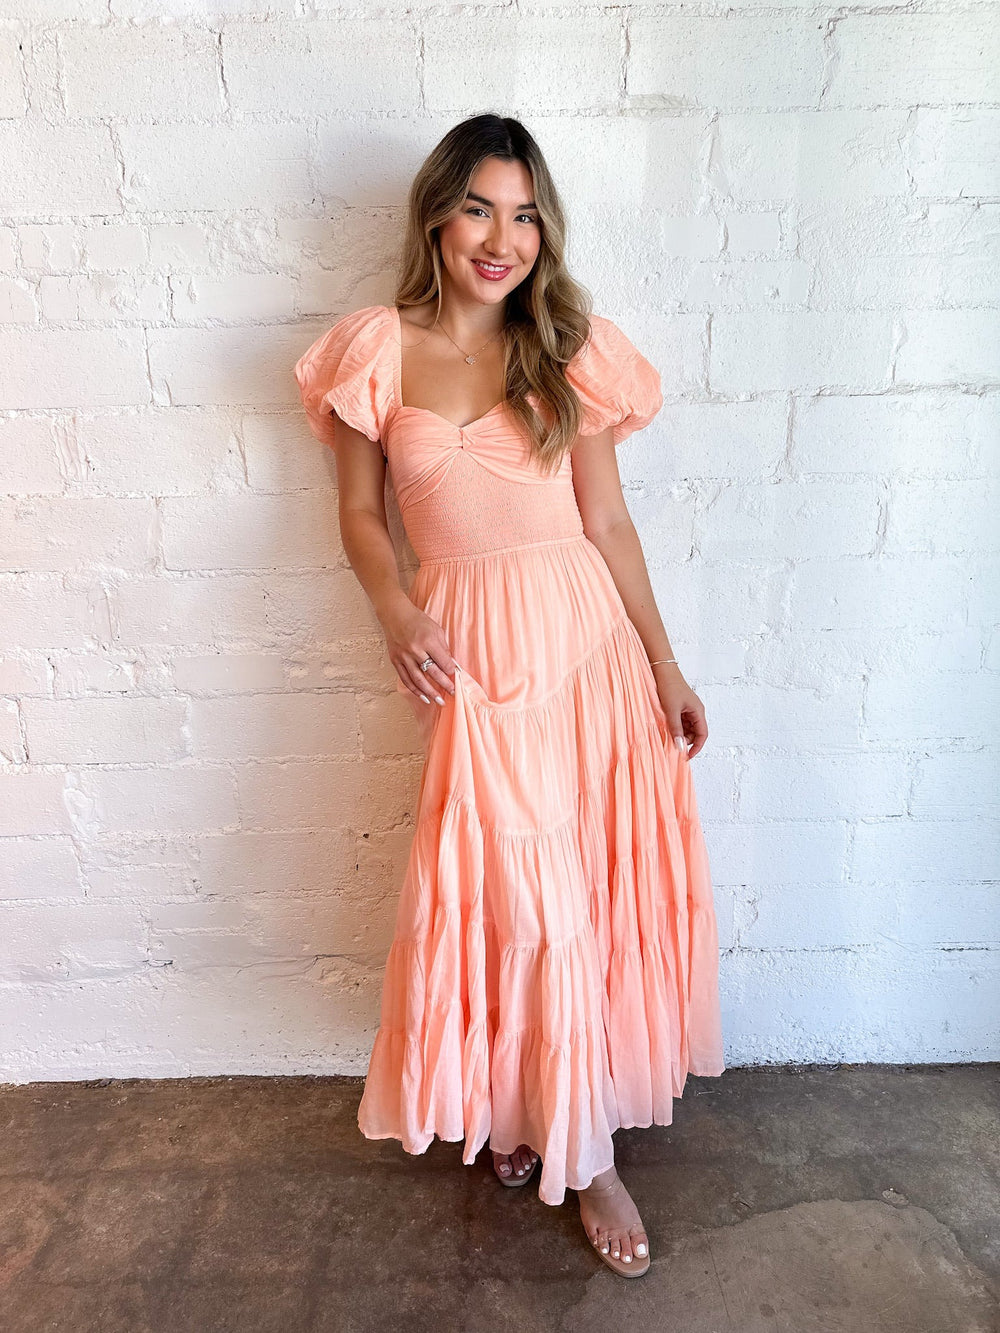 Short Sleeve Sundrenched Maxi, Dresses, Free People, Adeline, dallas boutique, dallas texas, texas boutique, women's boutique dallas, adeline boutique, dallas boutique, trendy boutique, affordable boutique